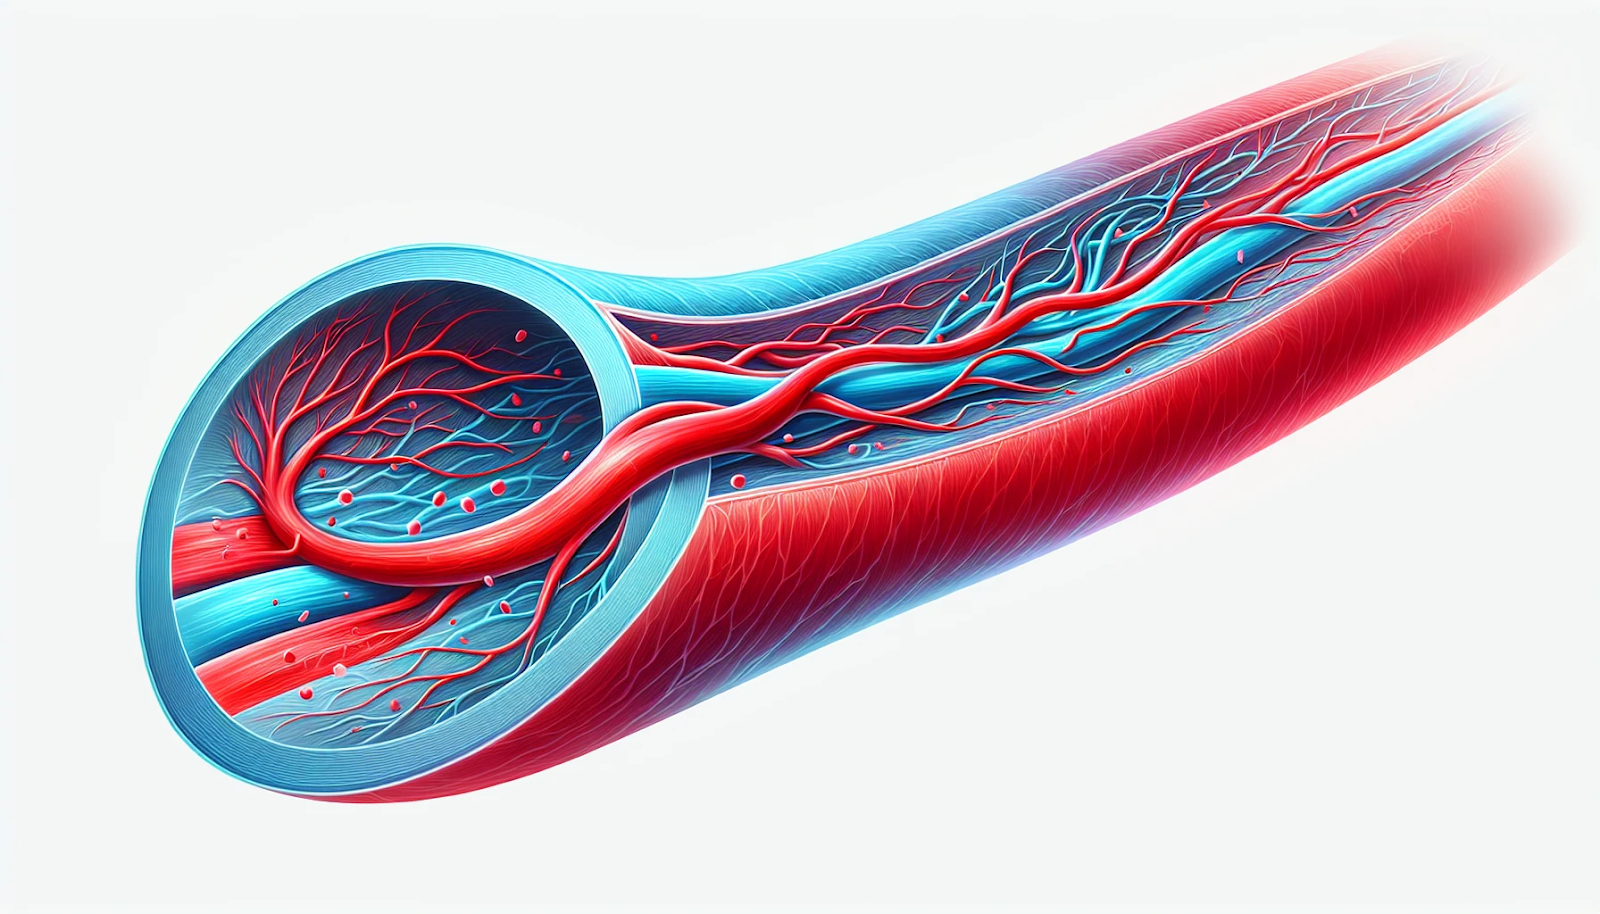 Illustration of blood flow in the peripheral artery